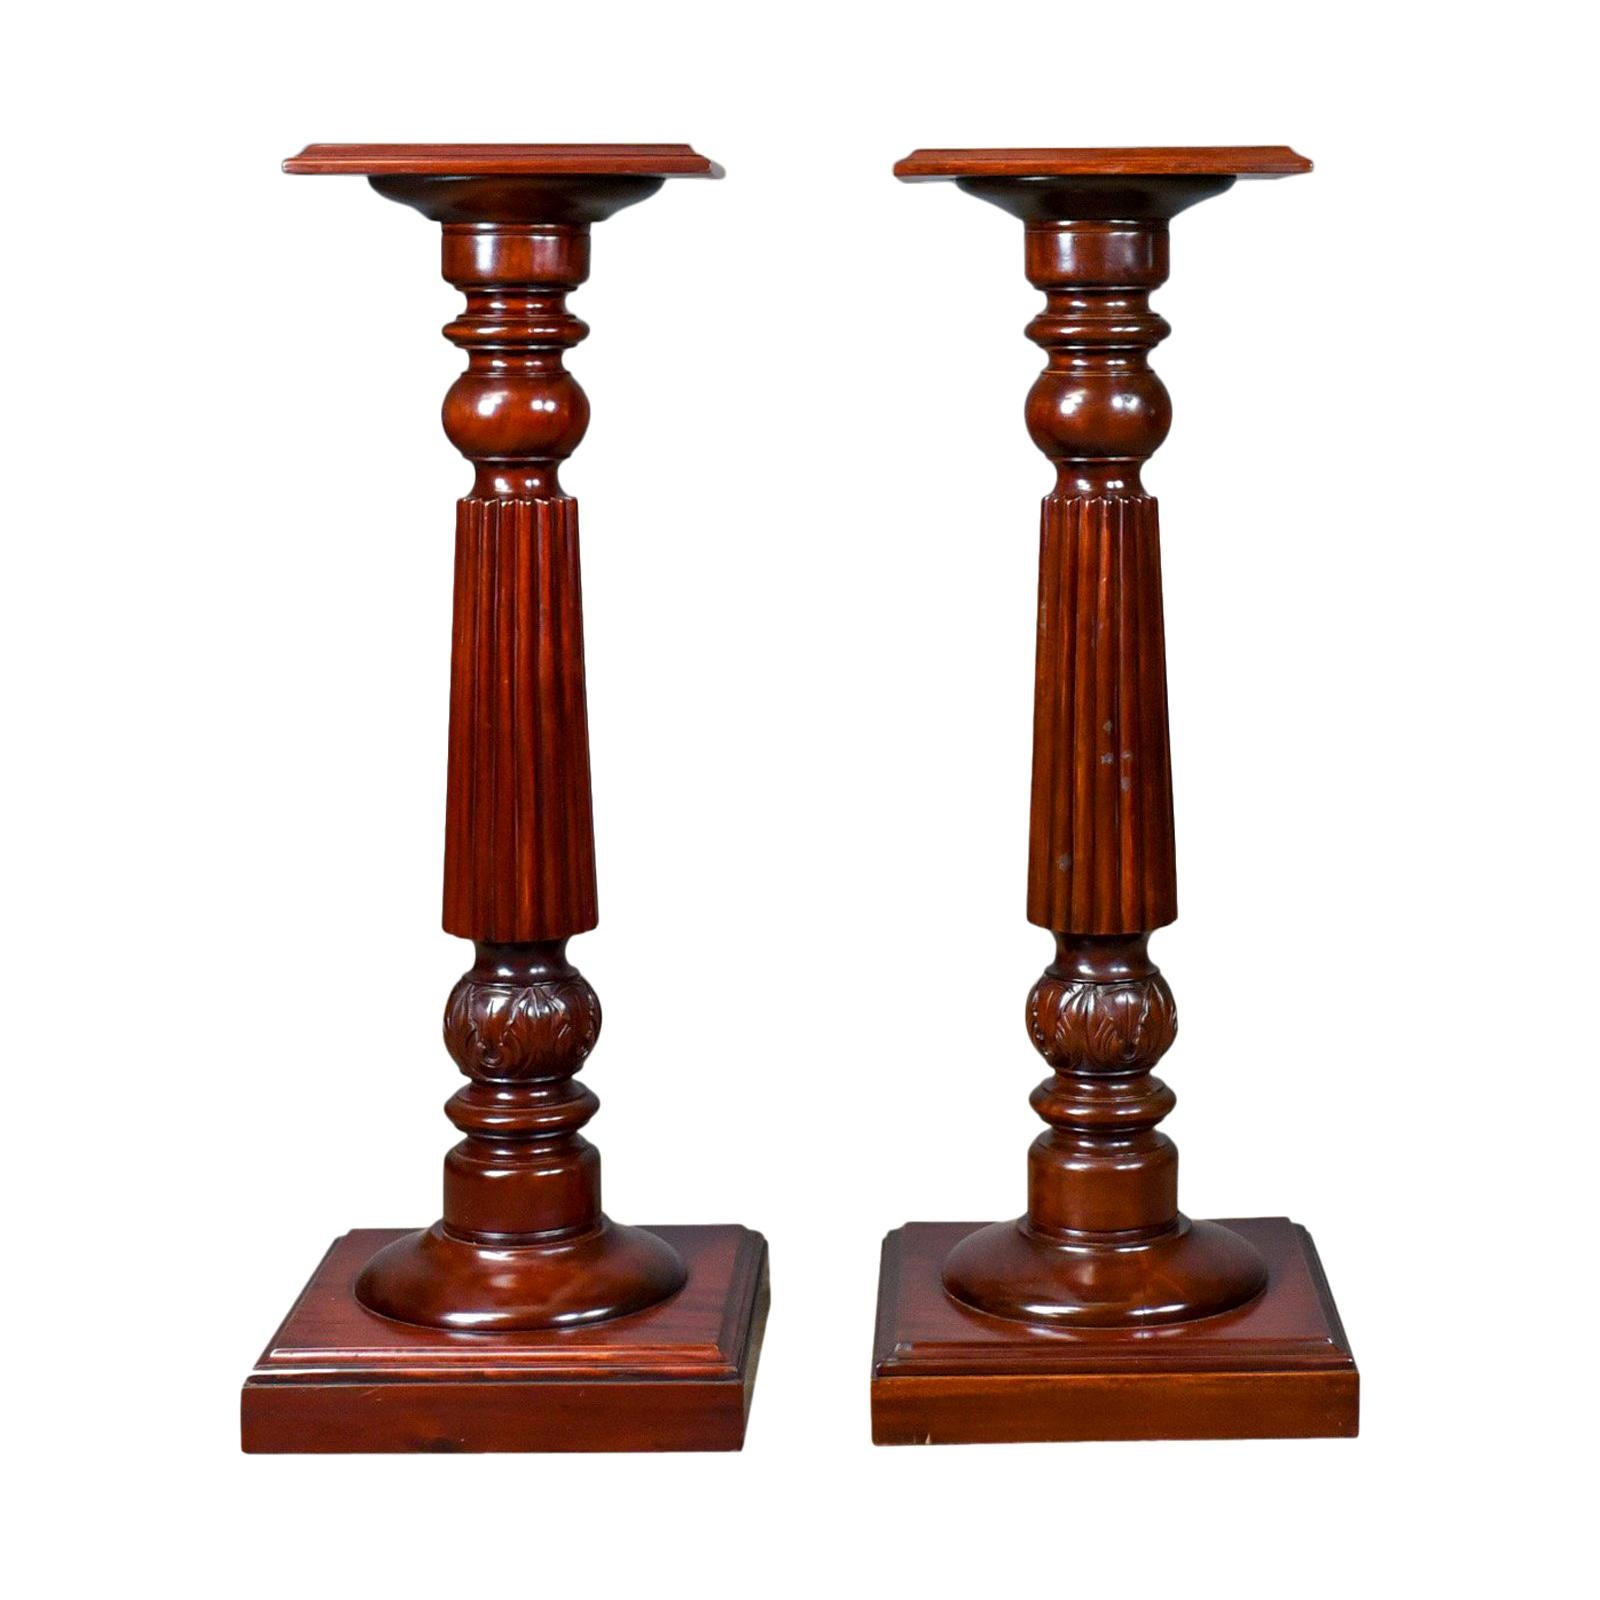 Pair of Vintage Torcheres, Victorian Taste, Mahogany Plant Stand